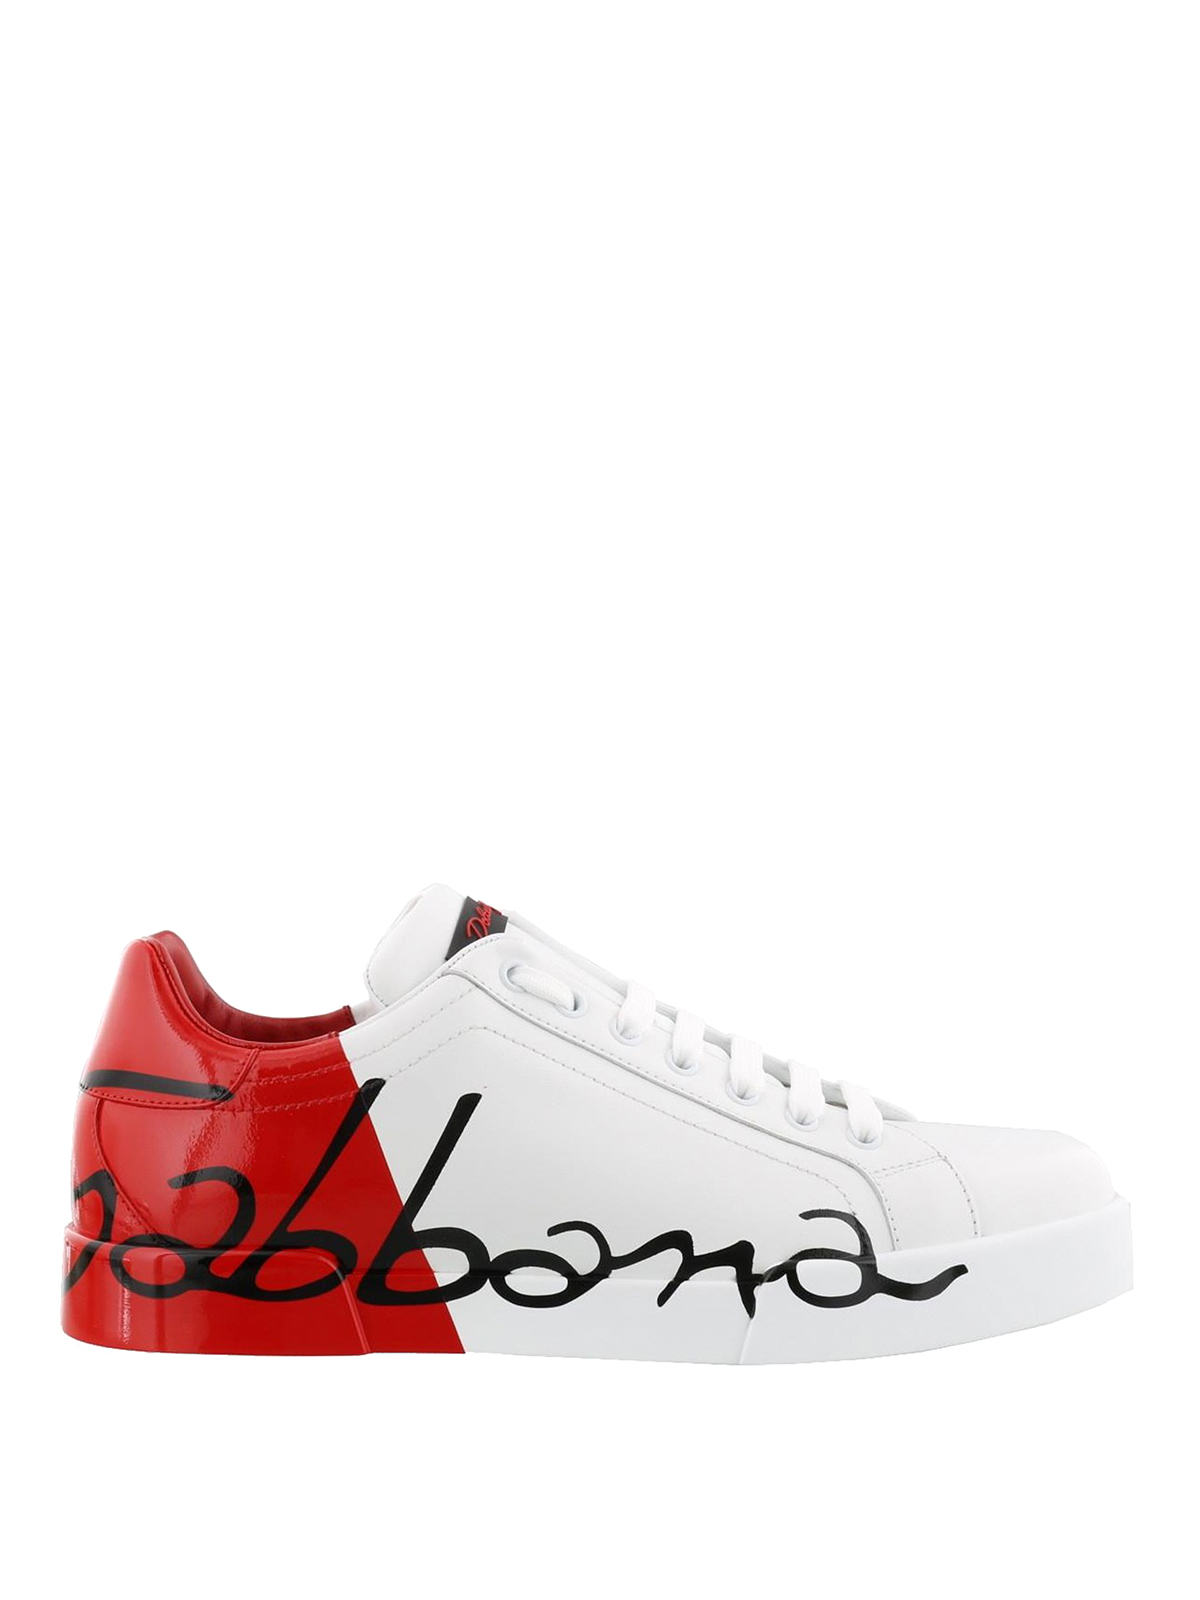 dolce and gabbana trainers red